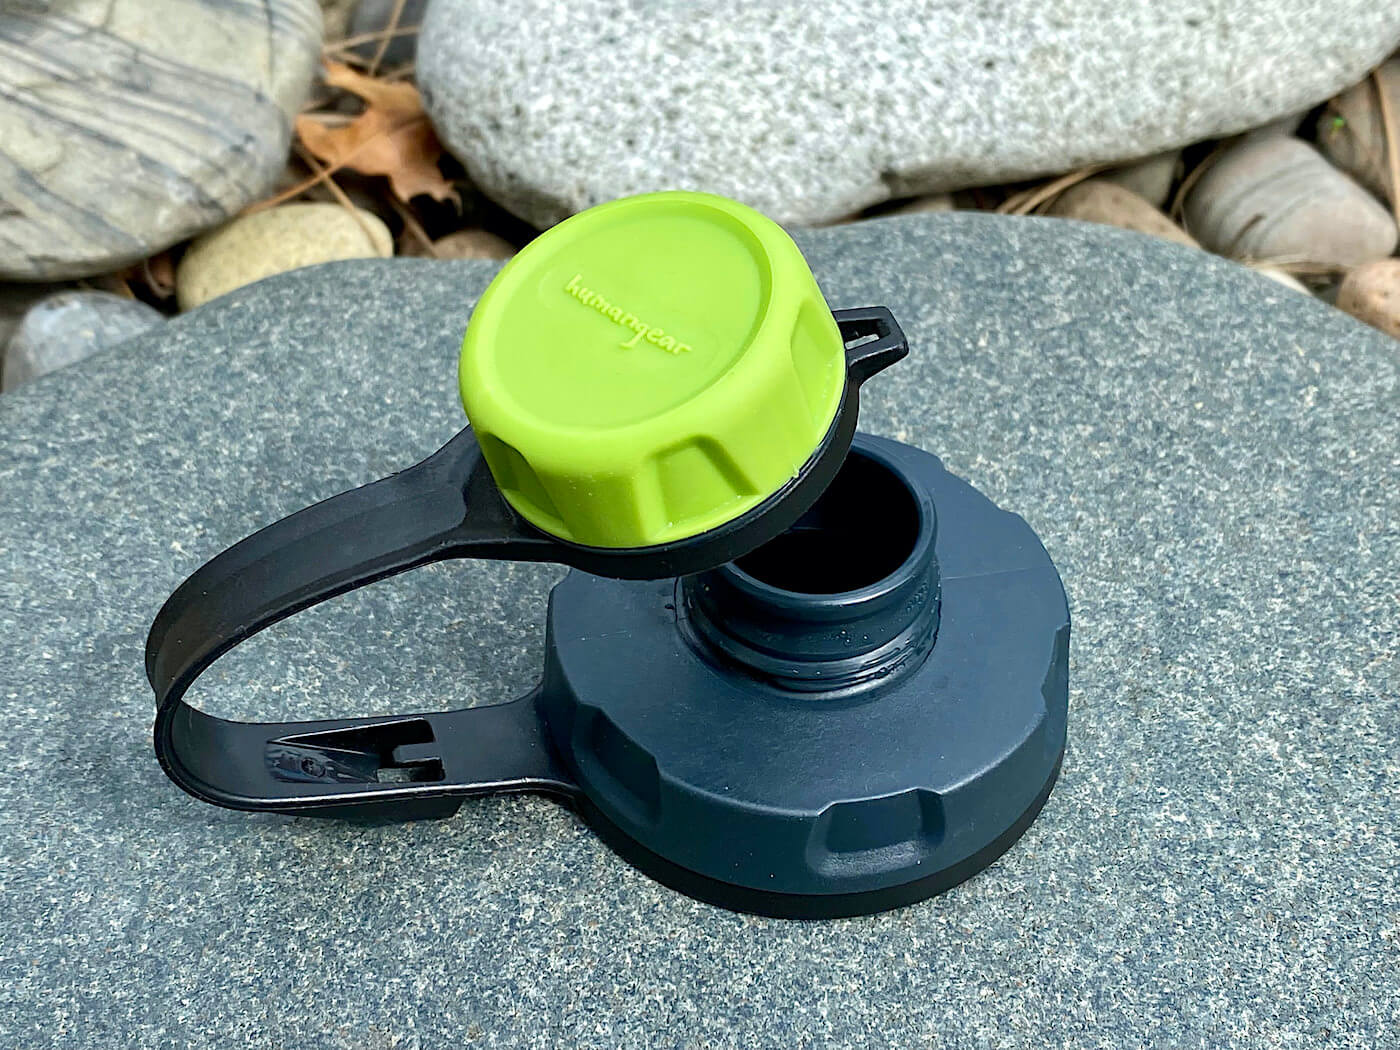 This photo shows the humangear capCAP+ 2-in-1 water bottle cap.